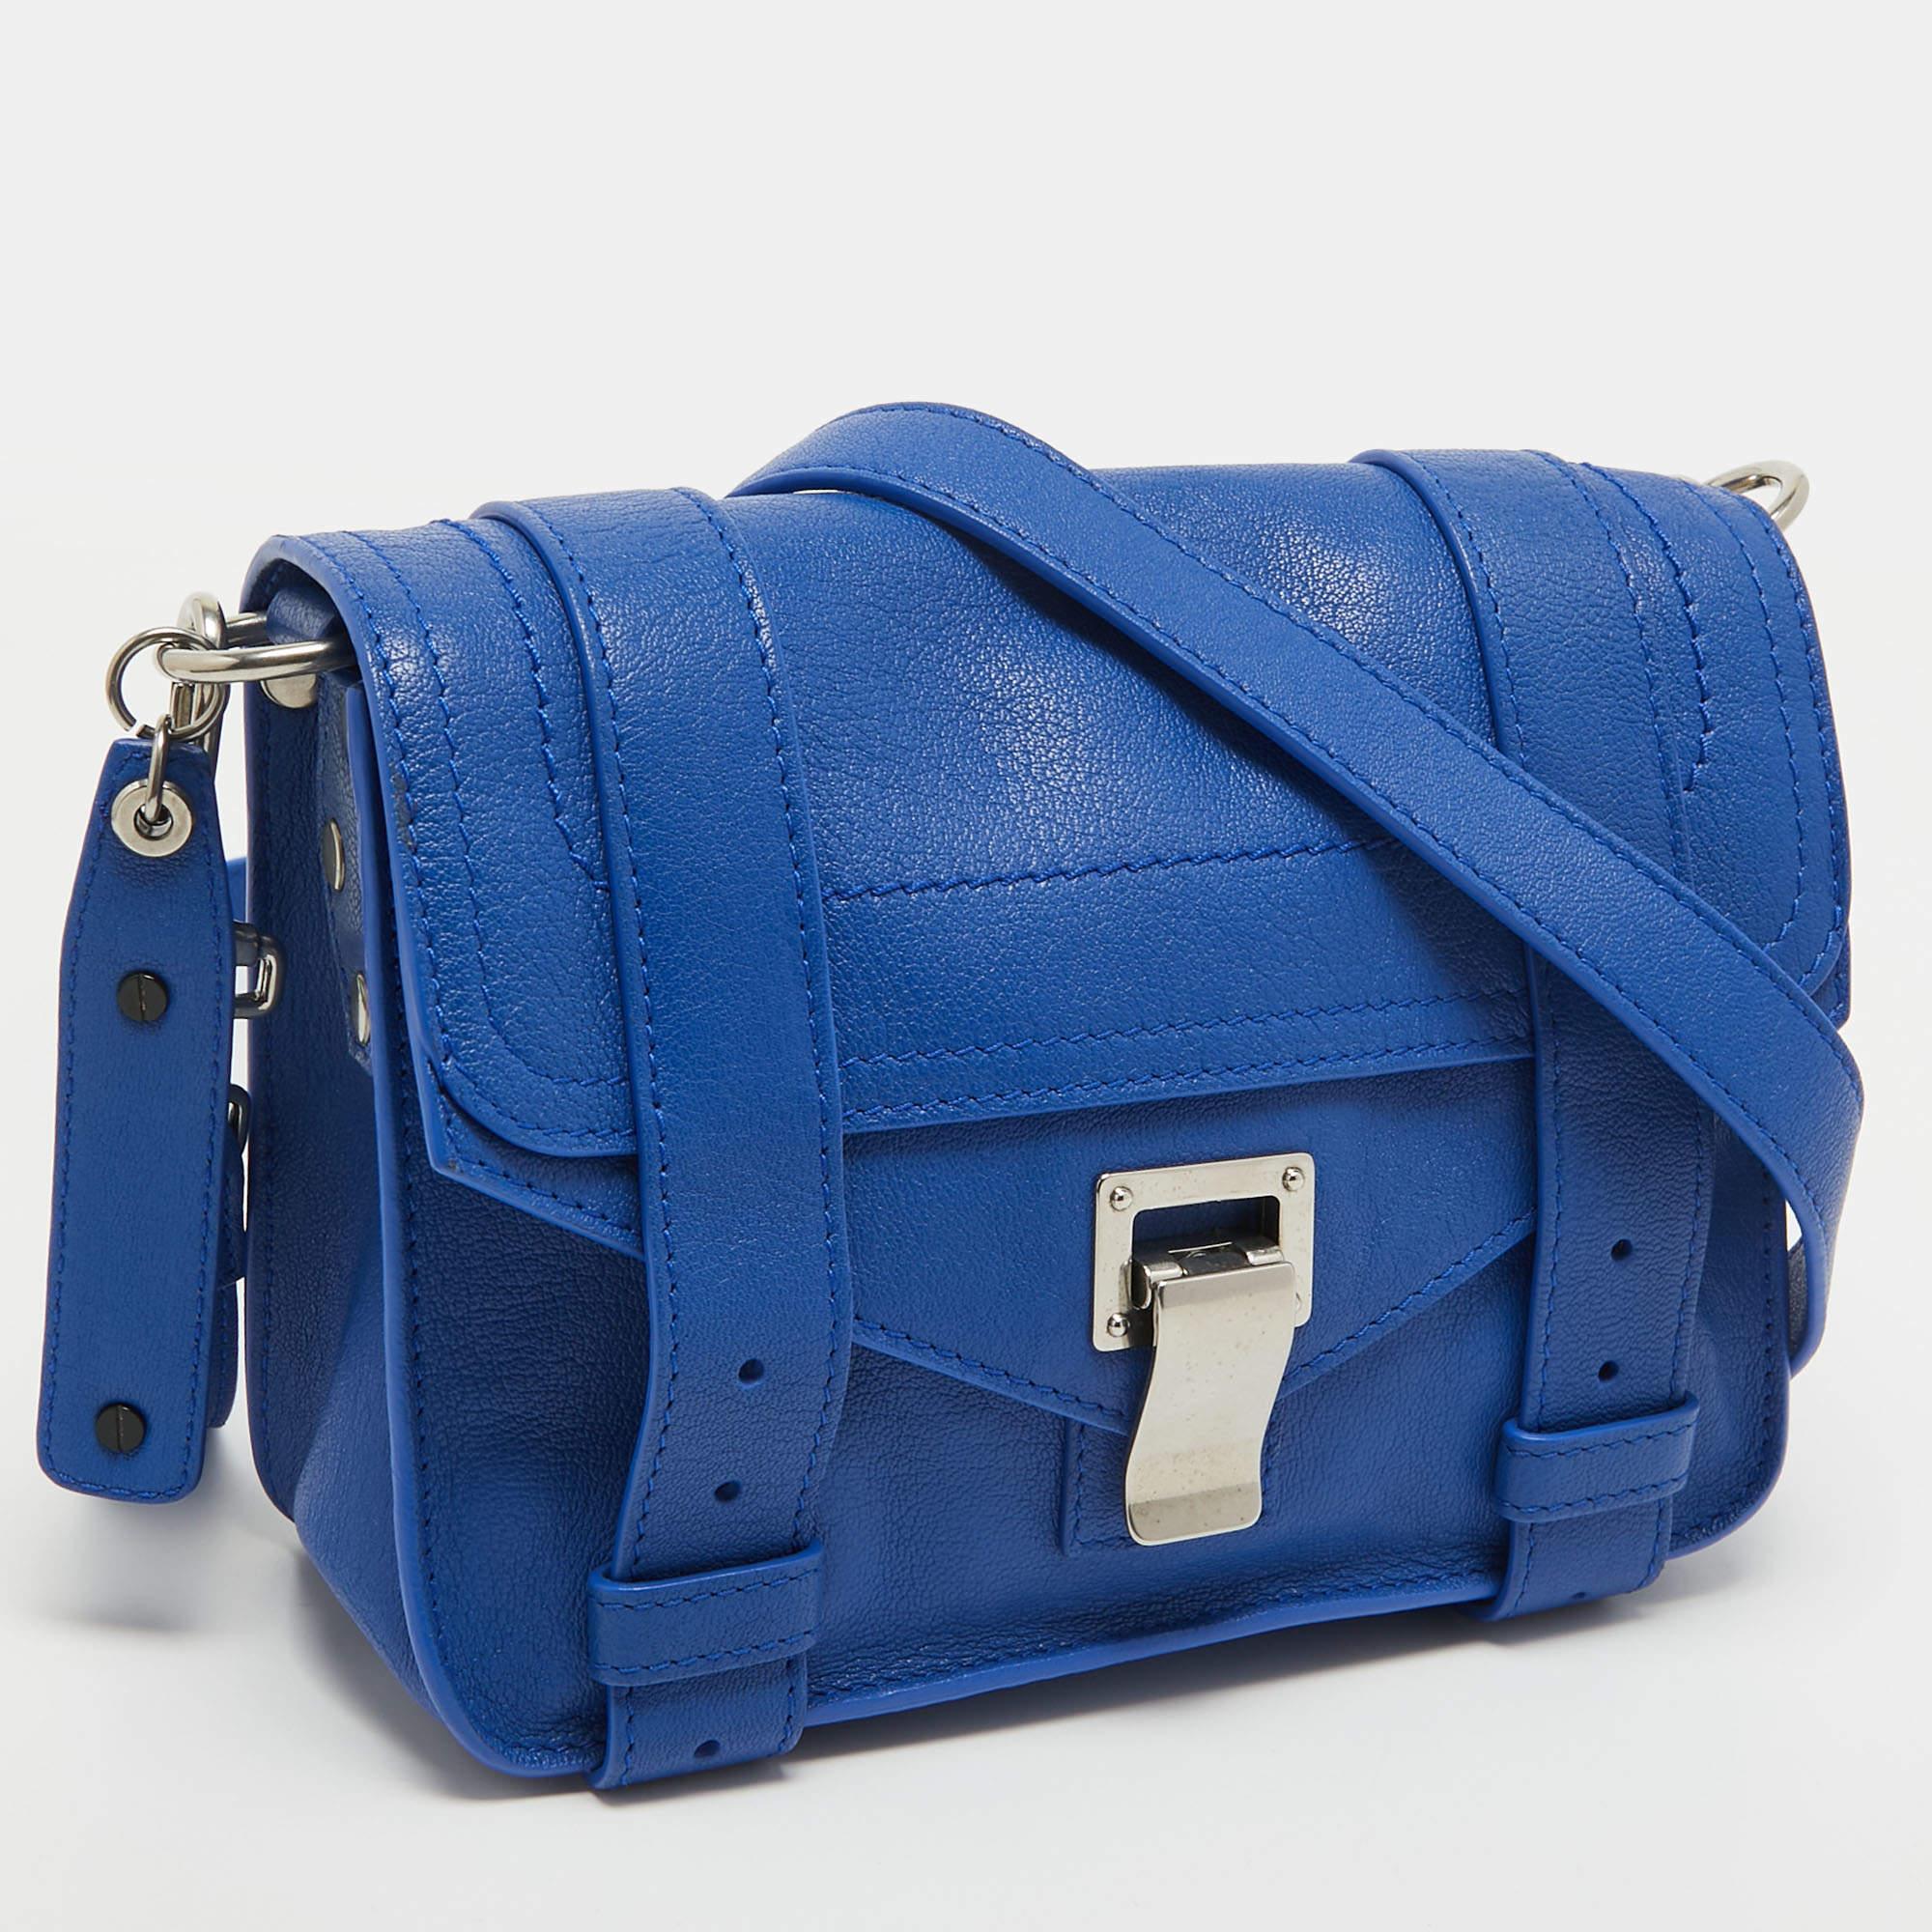 The Proenza Schouler PS1 Crossbody Bag is a chic and compact accessory, featuring premium leather in a vibrant blue hue. The iconic PS1 design includes a front flap with signature flip-lock closure, a detachable crossbody strap, and a well-organized